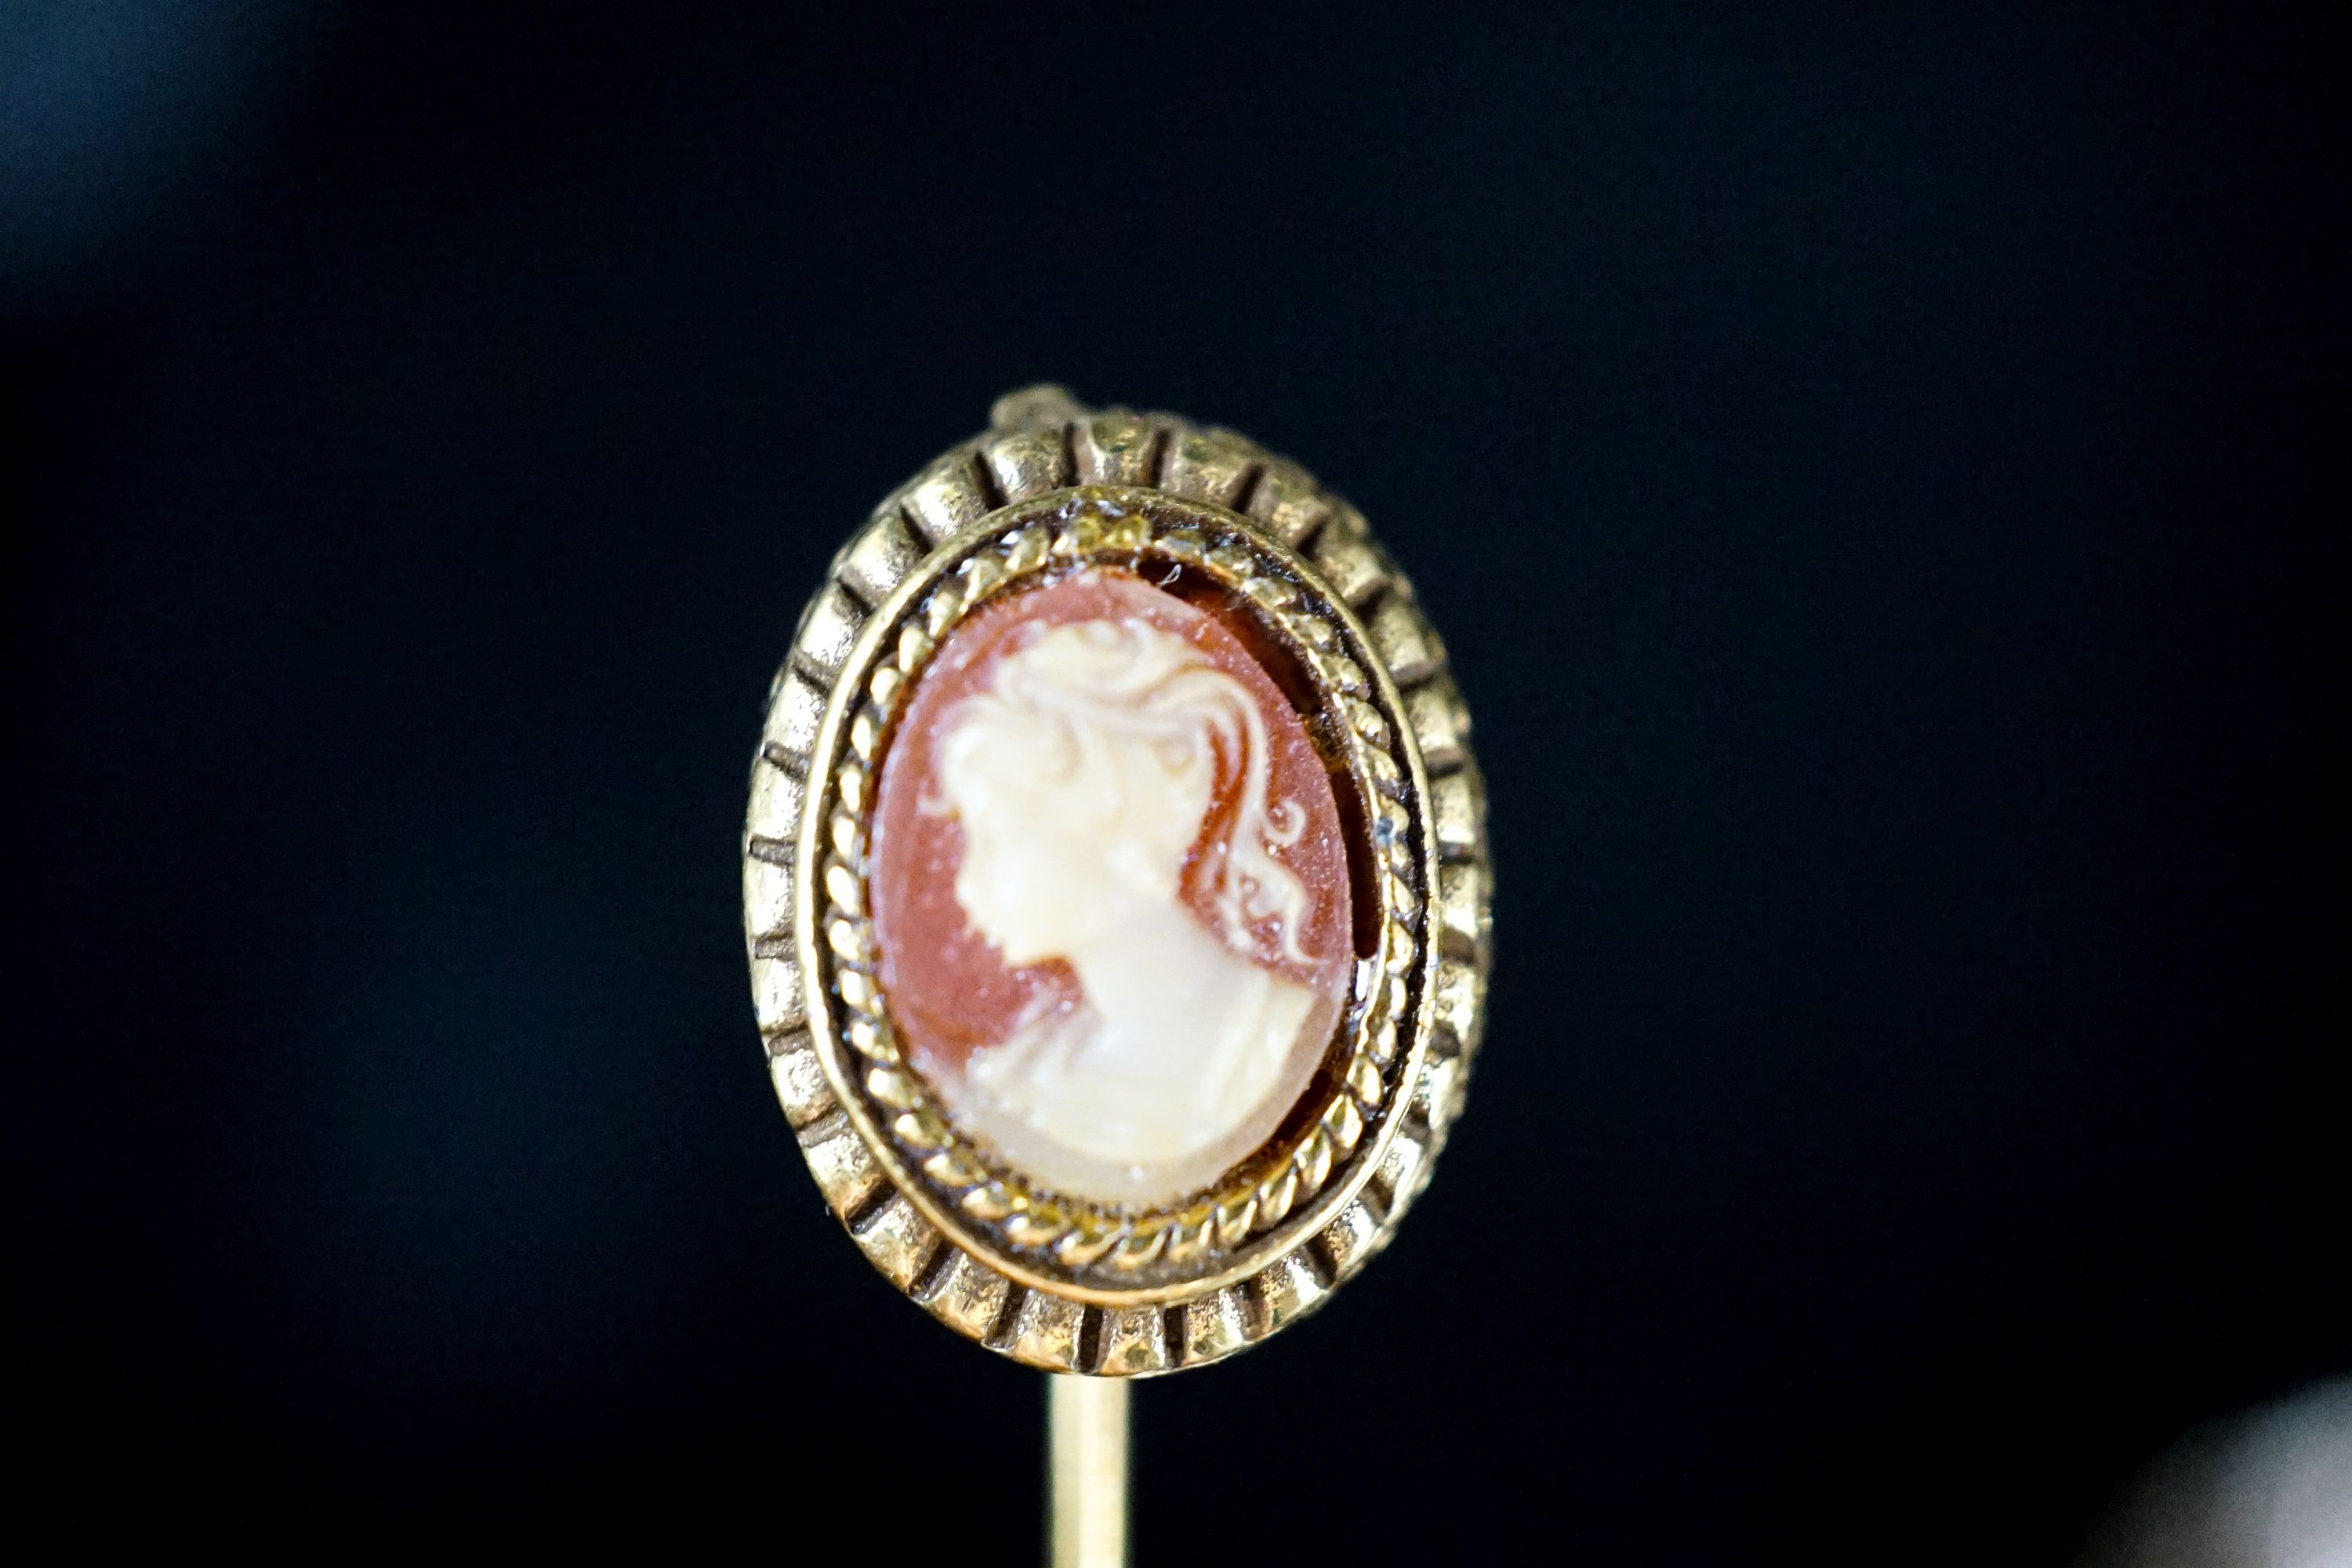 Two mounted cameo shell pendants, one with brooch attachment and a gilt metal cameo pin.